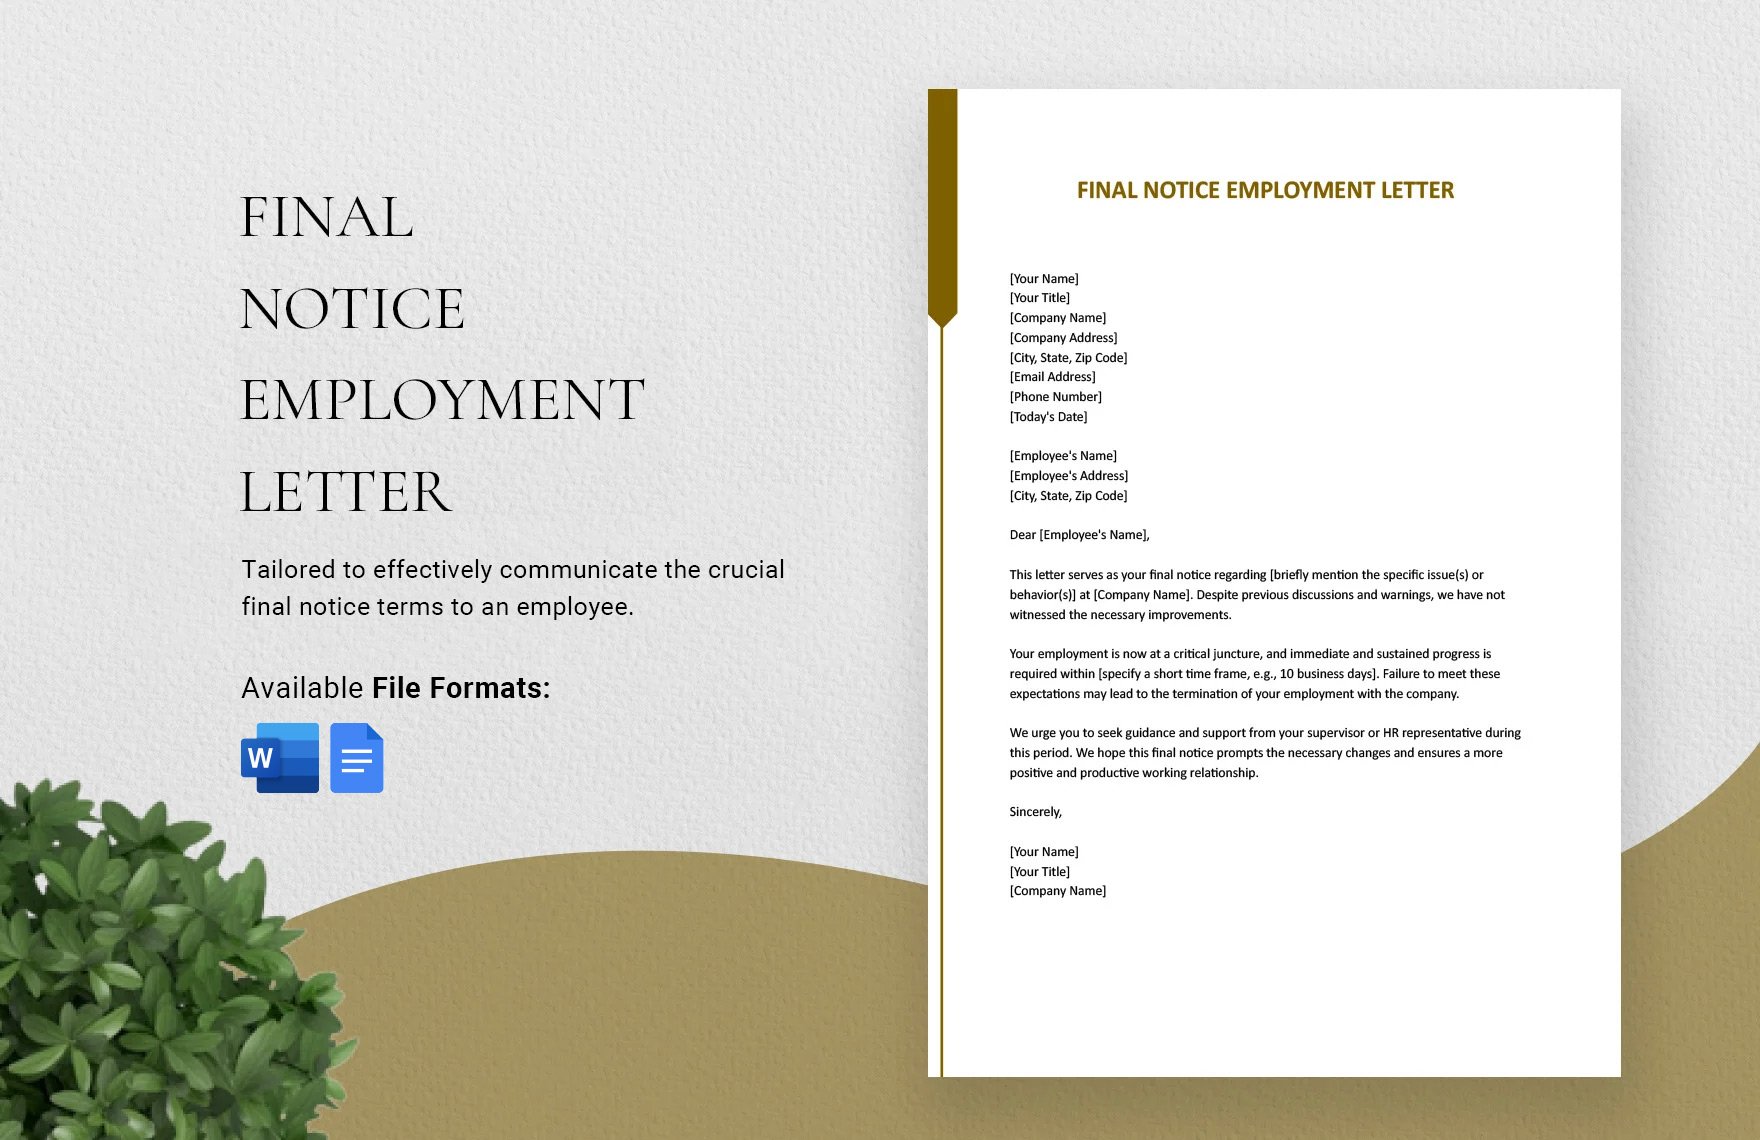 Free Final Notice Employment Letter in Word, Google Docs